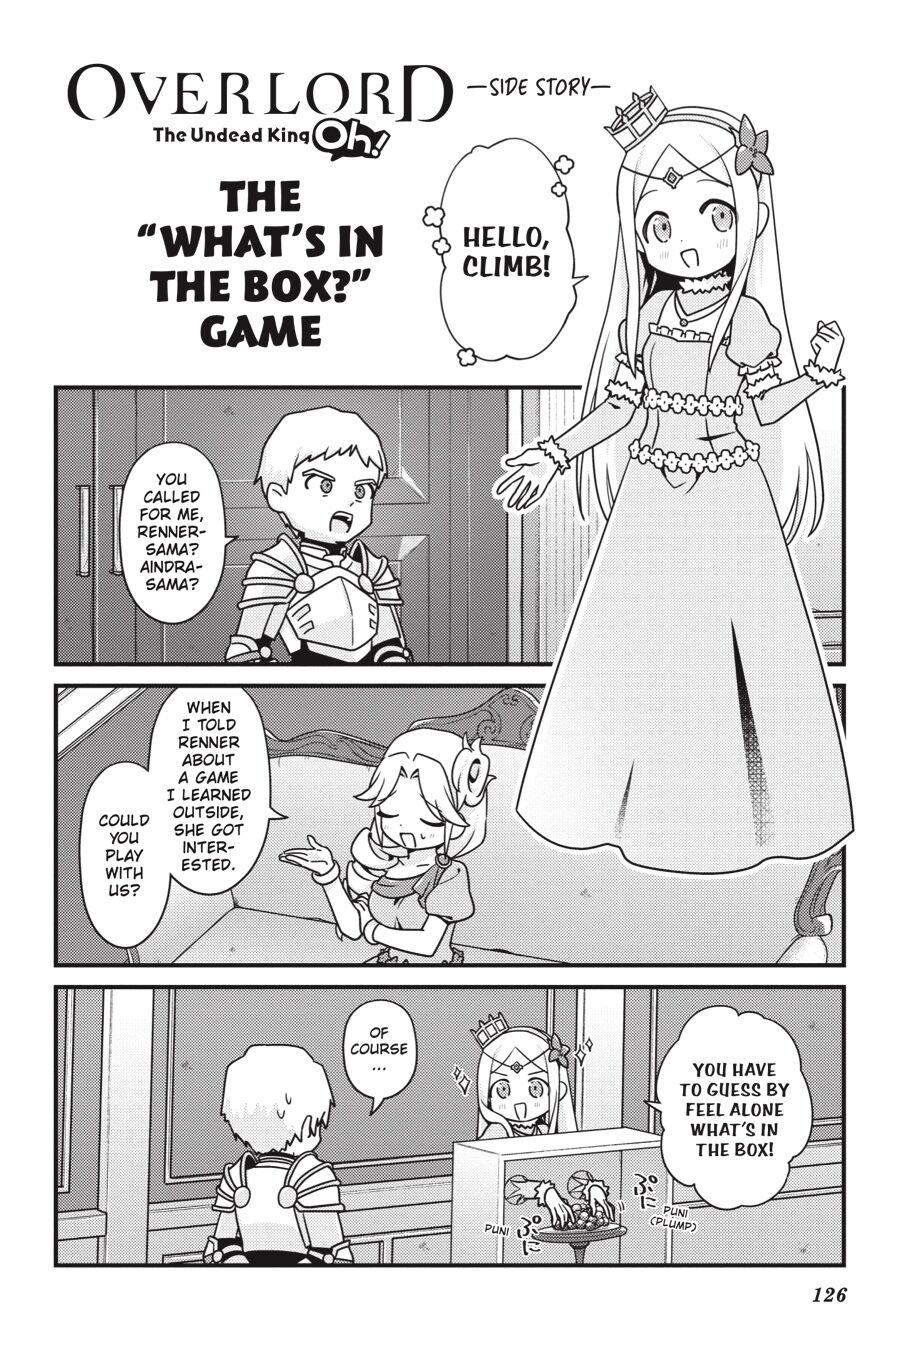 Overlord The Undead King Oh! - Page 1